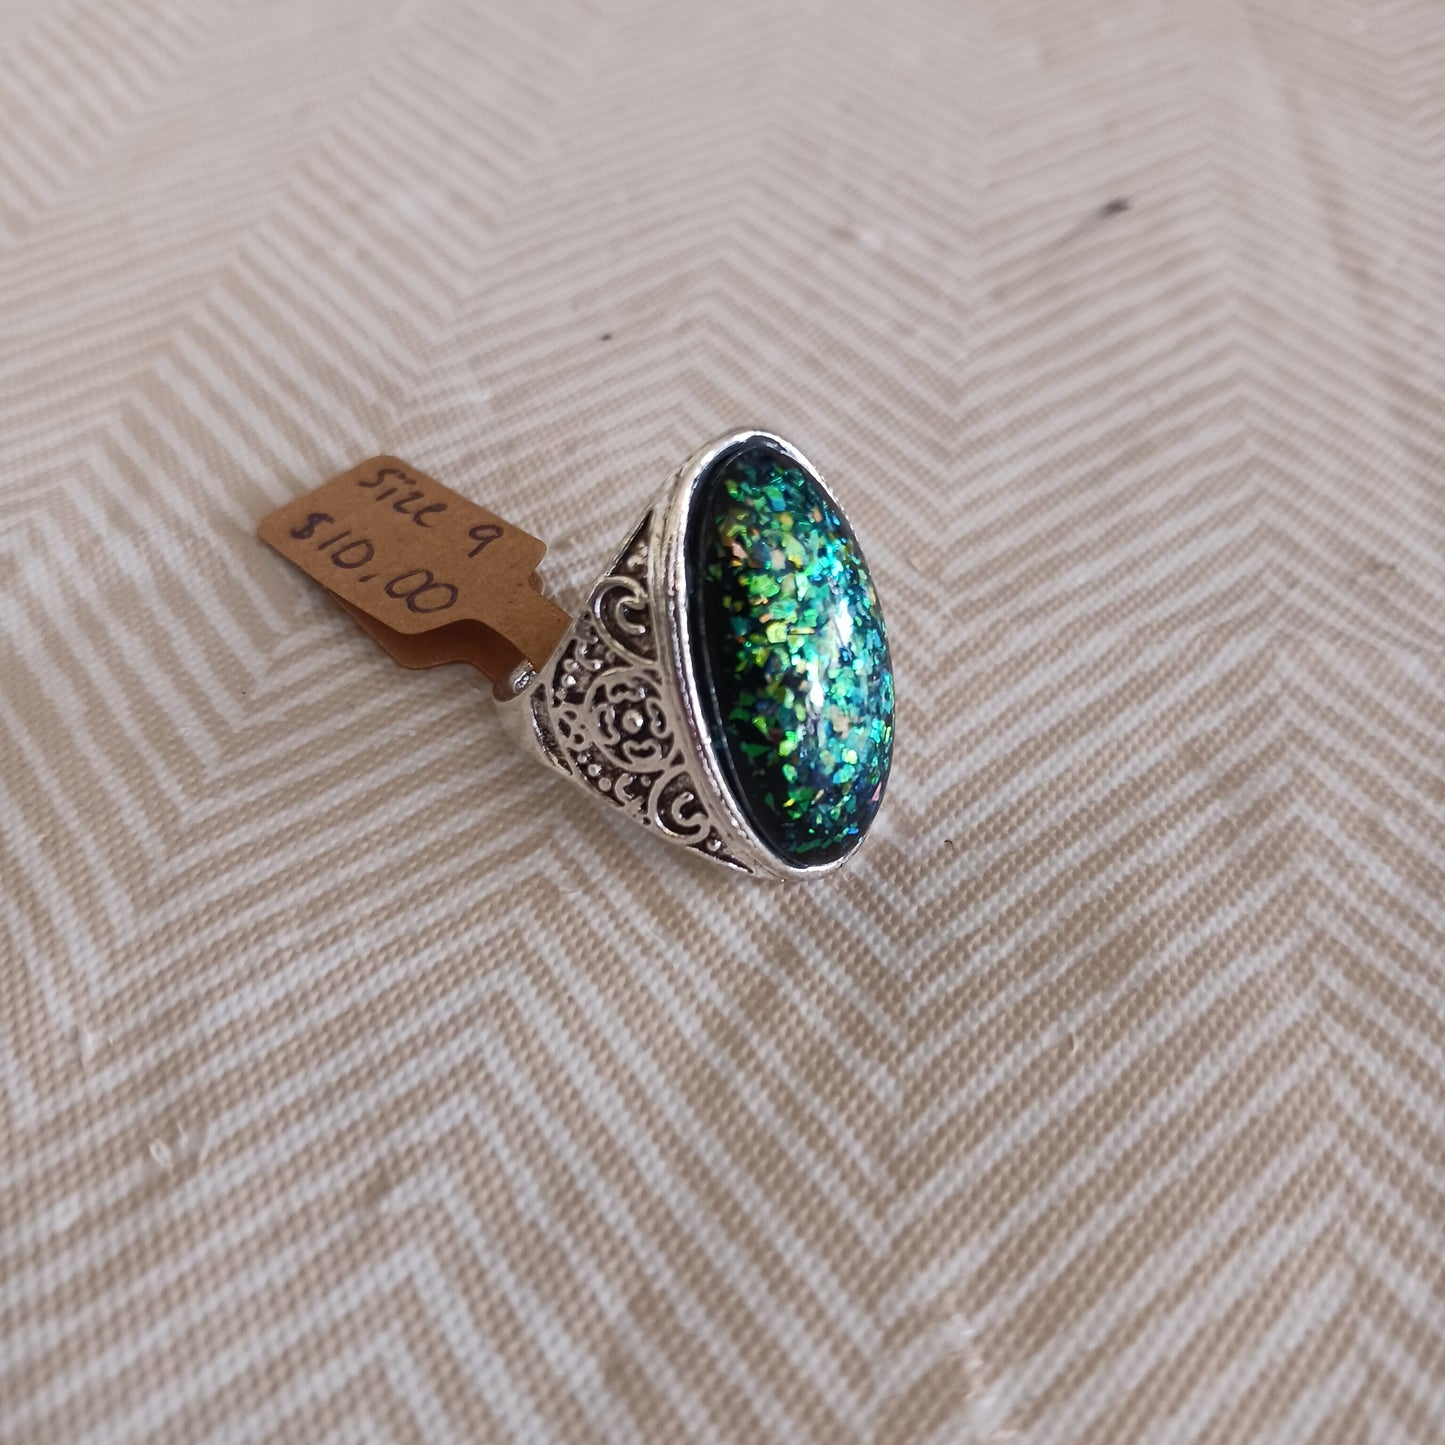 Green and Black Fashion Ring Size 8.5